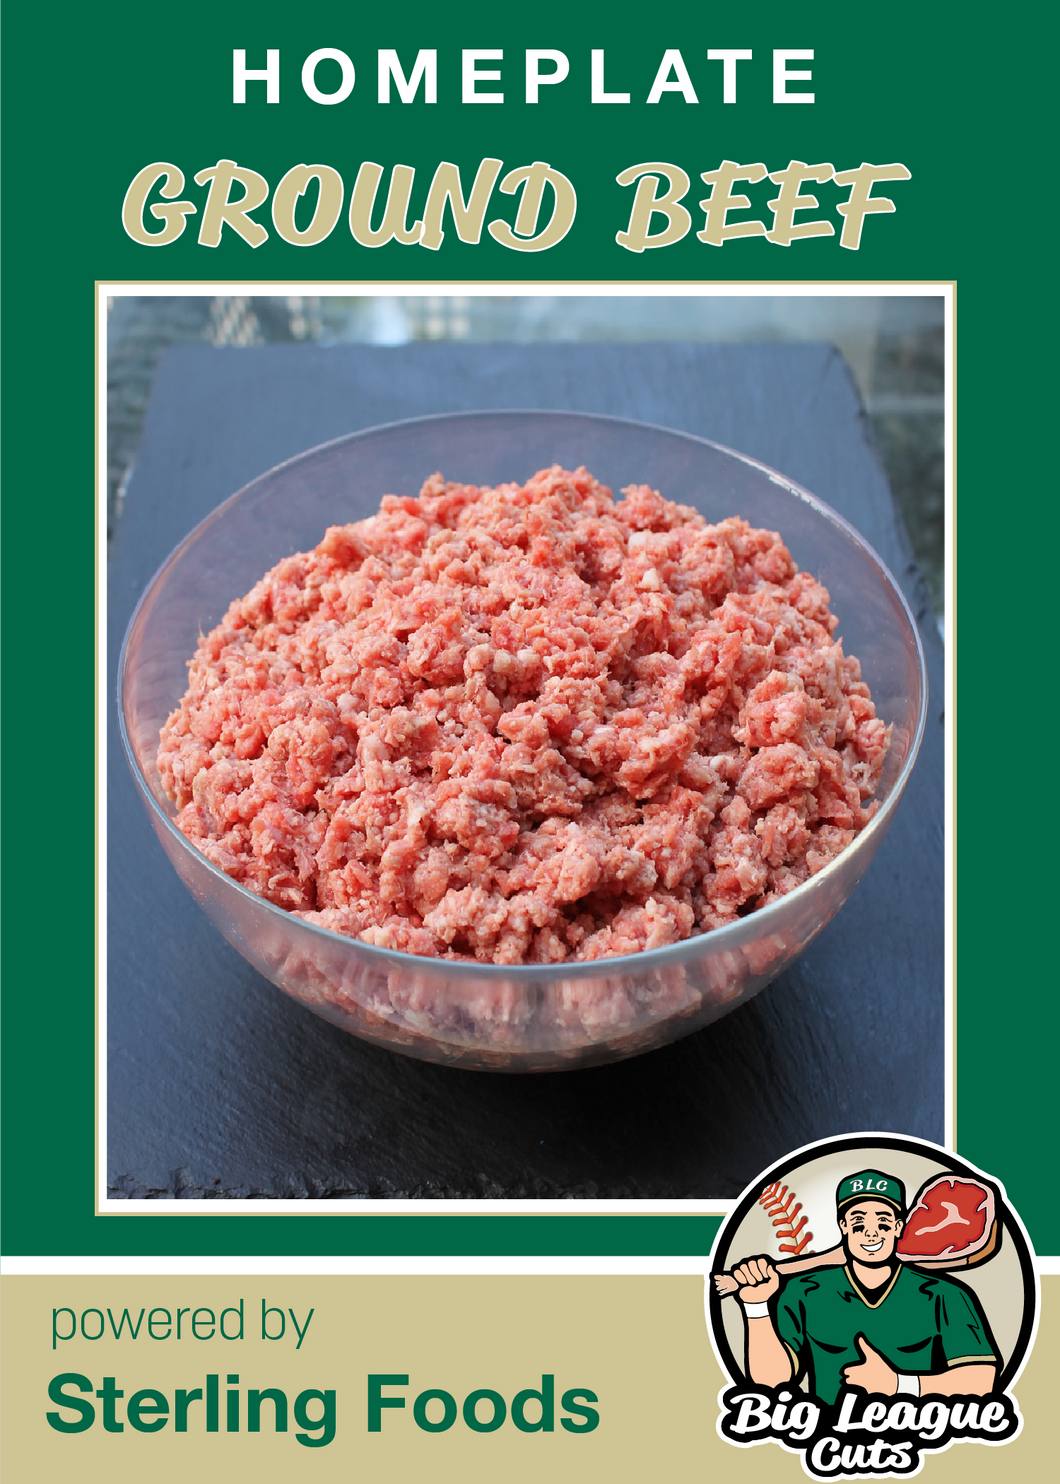 Home Plate Ground Beef (4) 1 lb. packs